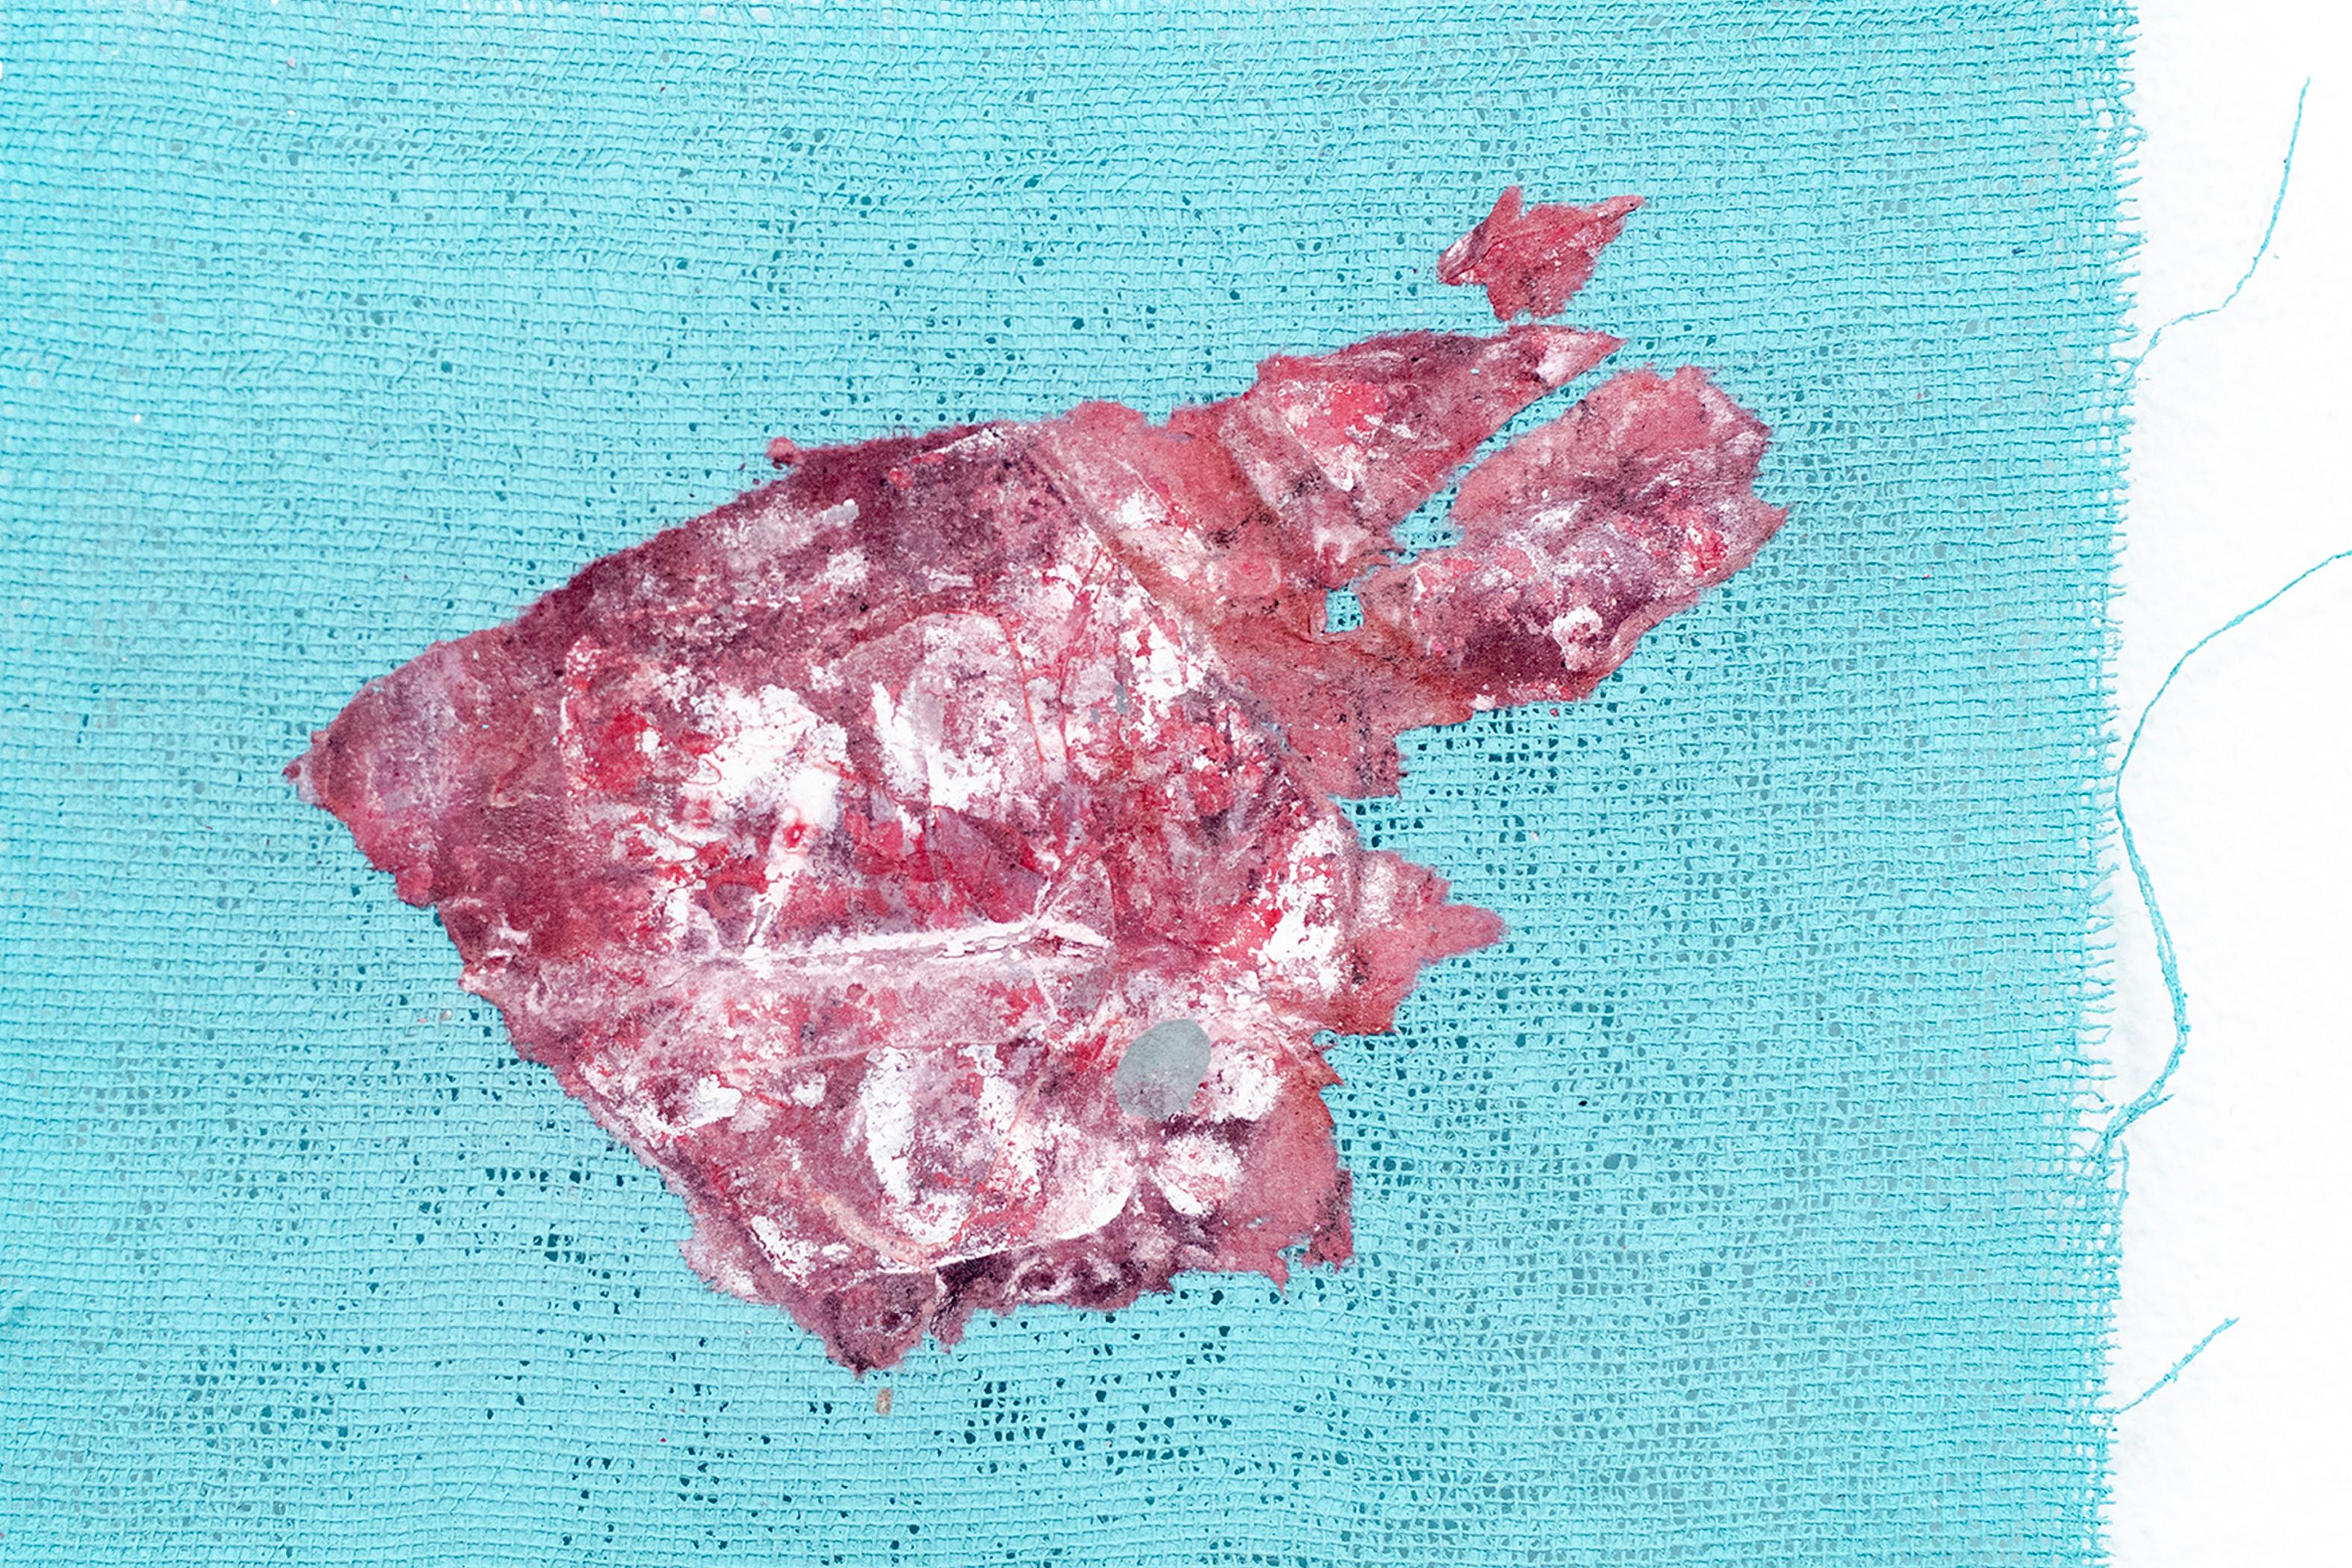 Flesh, Mulberry paper and acrylic on gauze 1